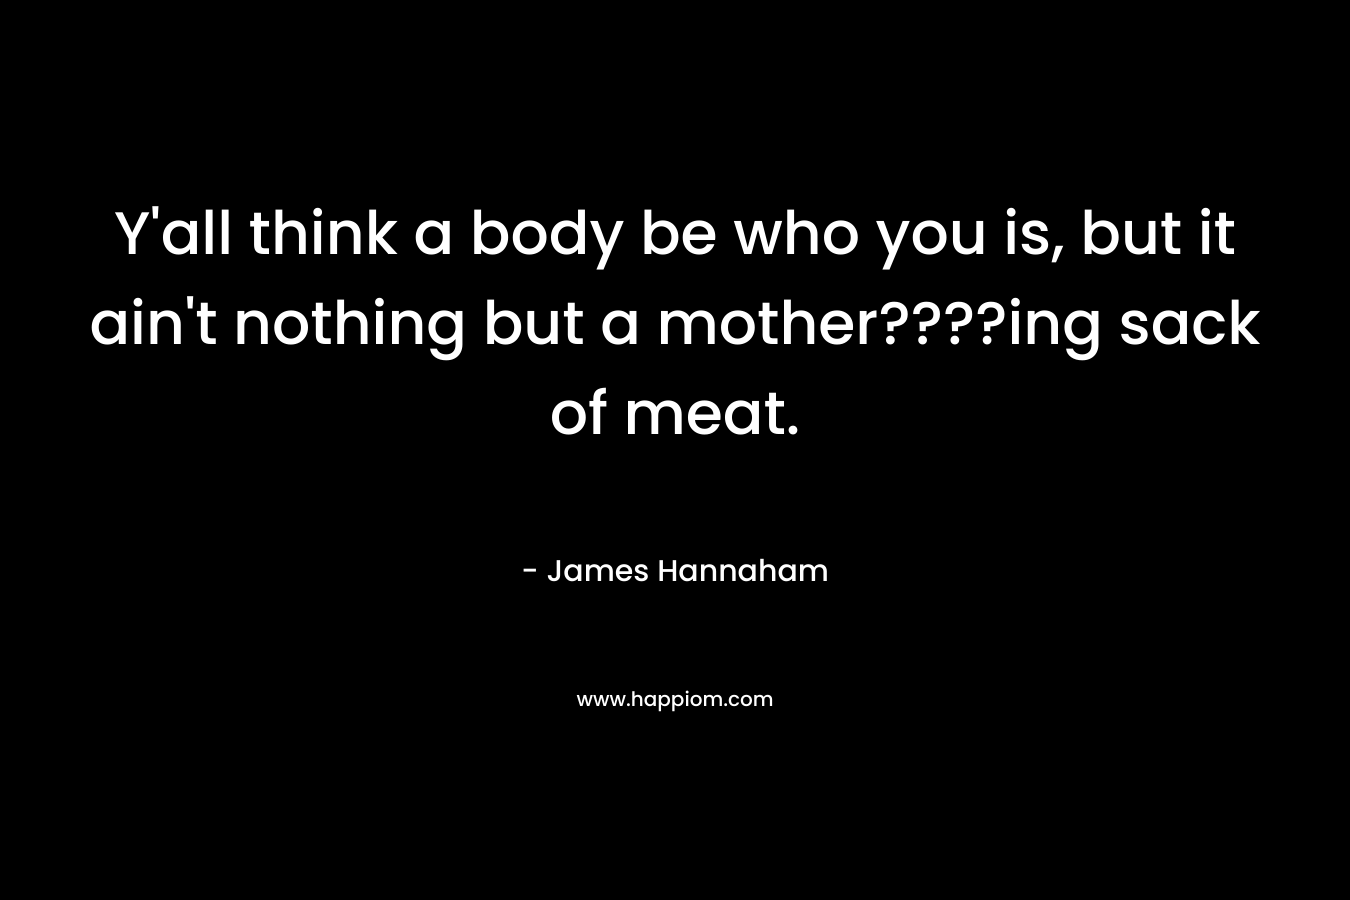 Y’all think a body be who you is, but it ain’t nothing but a mother????ing sack of meat. – James Hannaham